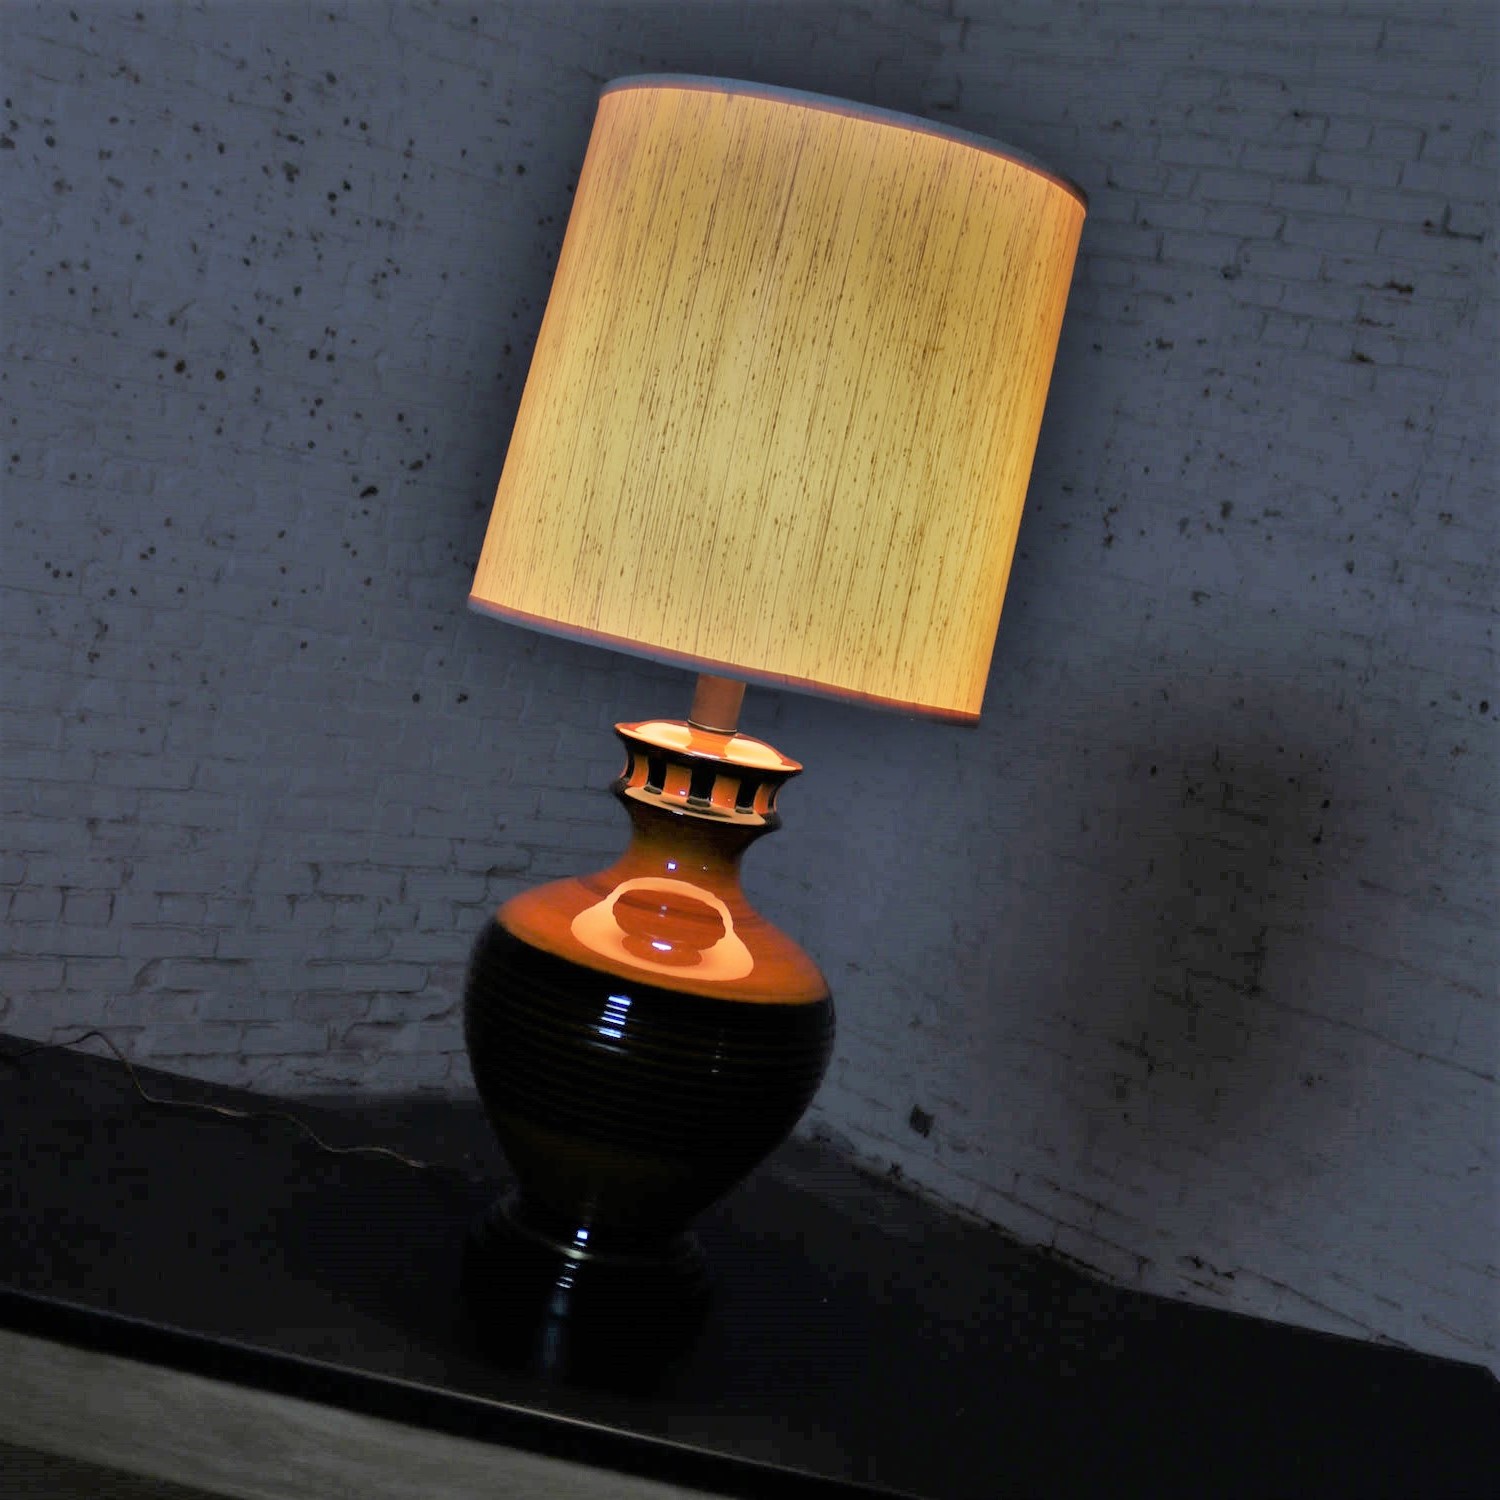 Large Brown and Black Md Century Modern Bulbous Ceramic Lamp